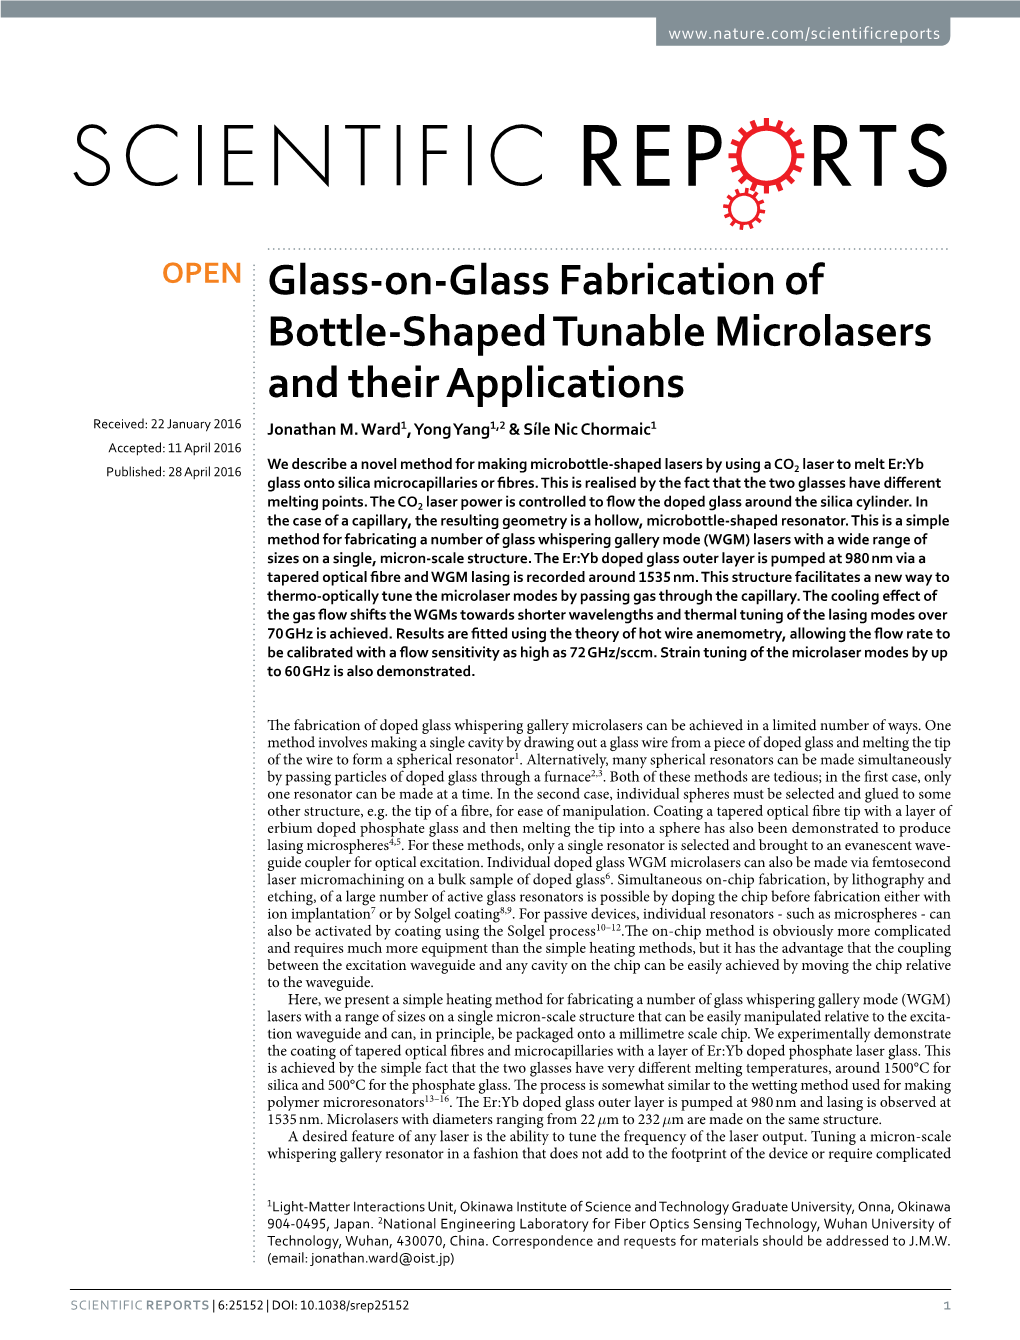 Glass-On-Glass Fabrication of Bottle-Shaped Tunable Microlasers and Their Applications Received: 22 January 2016 Jonathan M